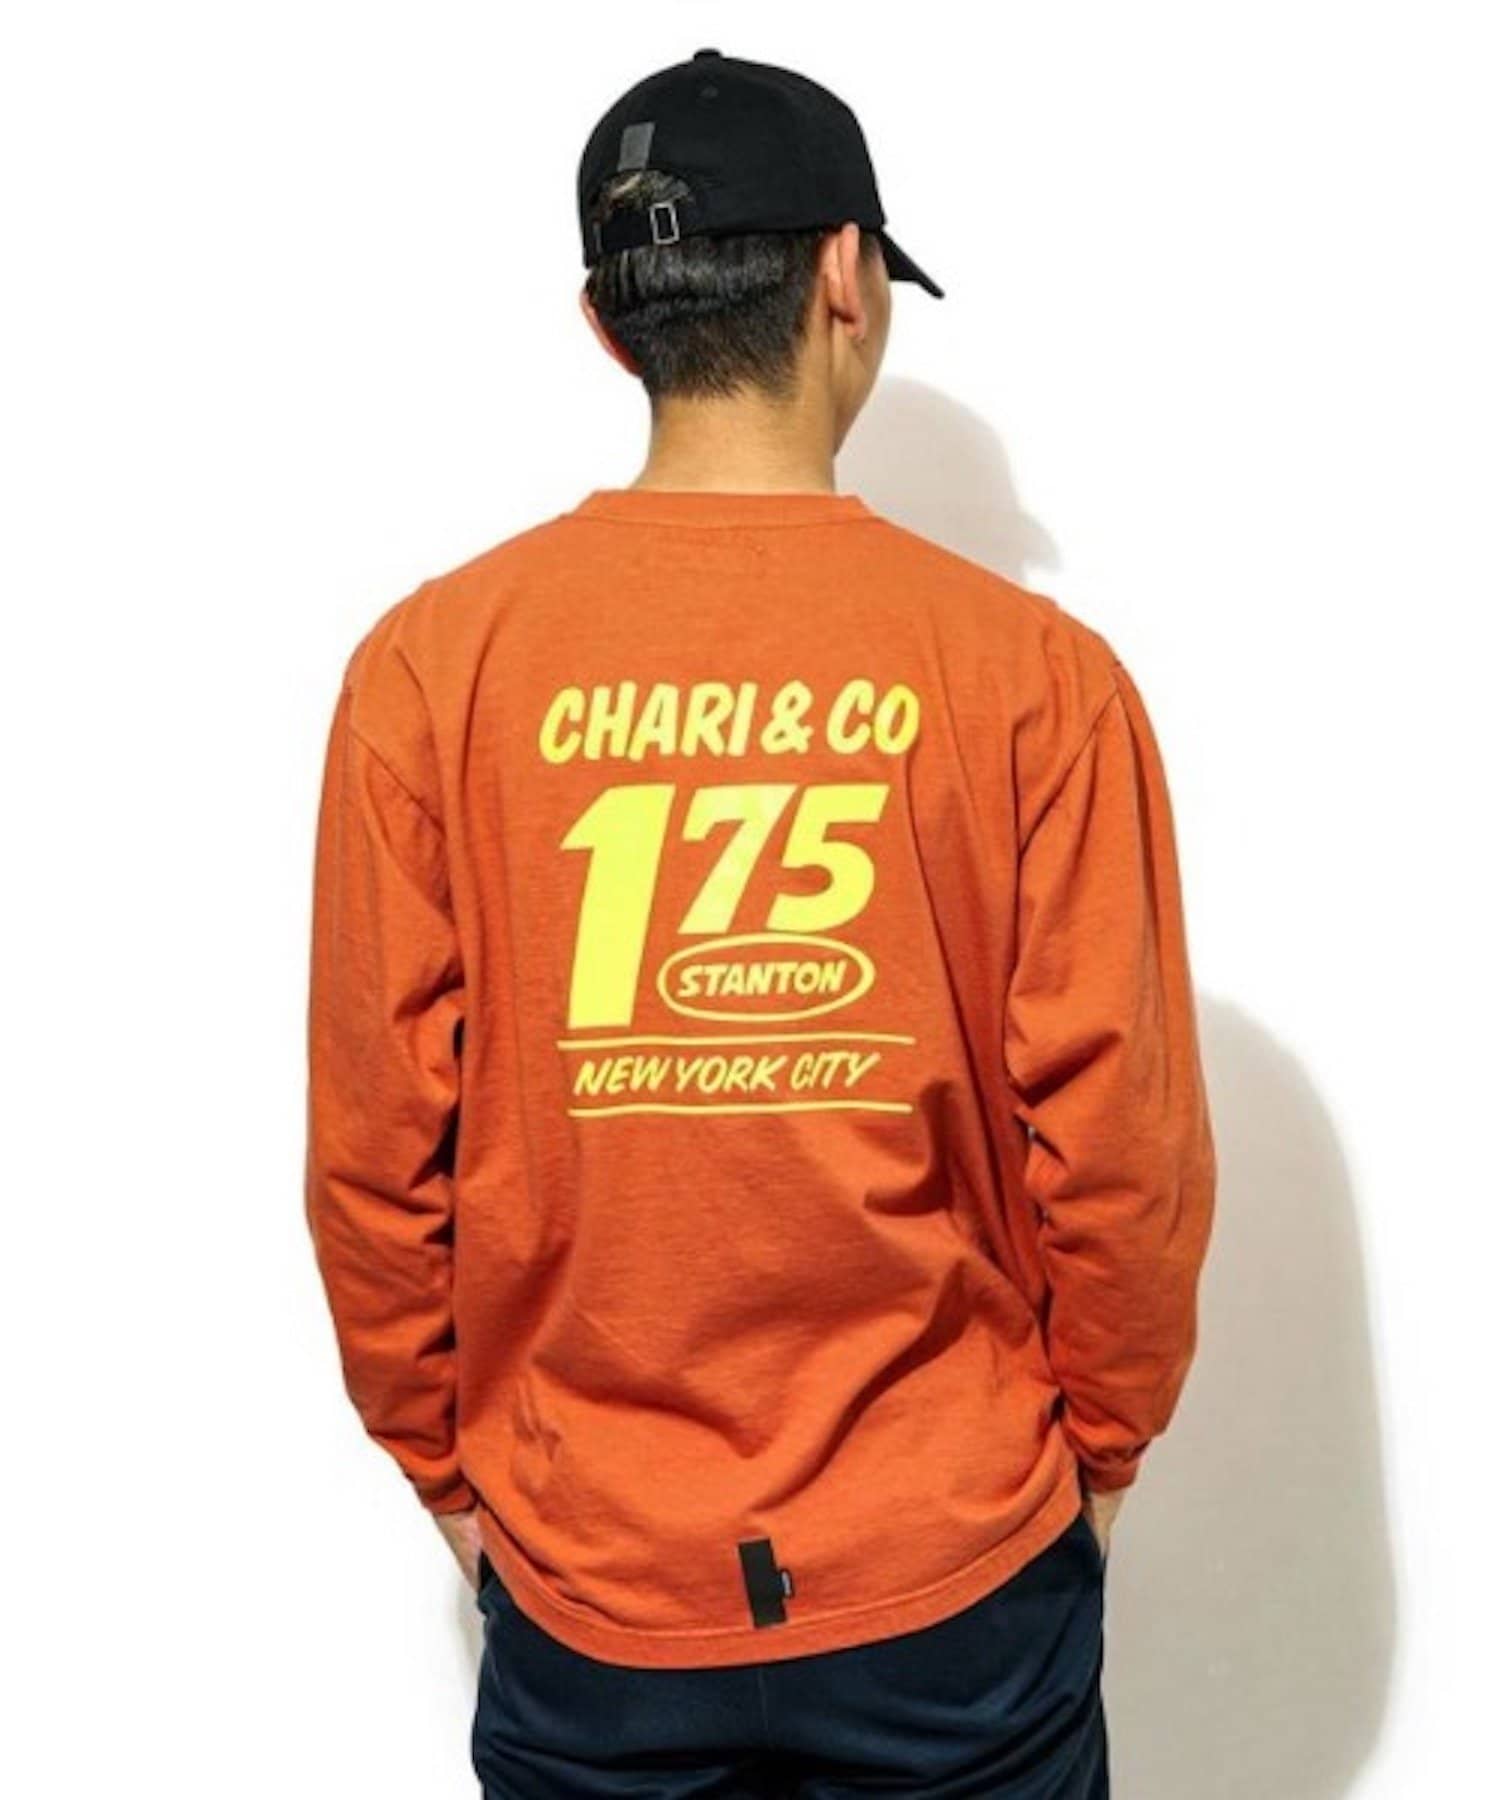 WHO’S WHO gallery(フーズフーギャラリー) 【CHARI&CO】GAS STATION L/S TEE